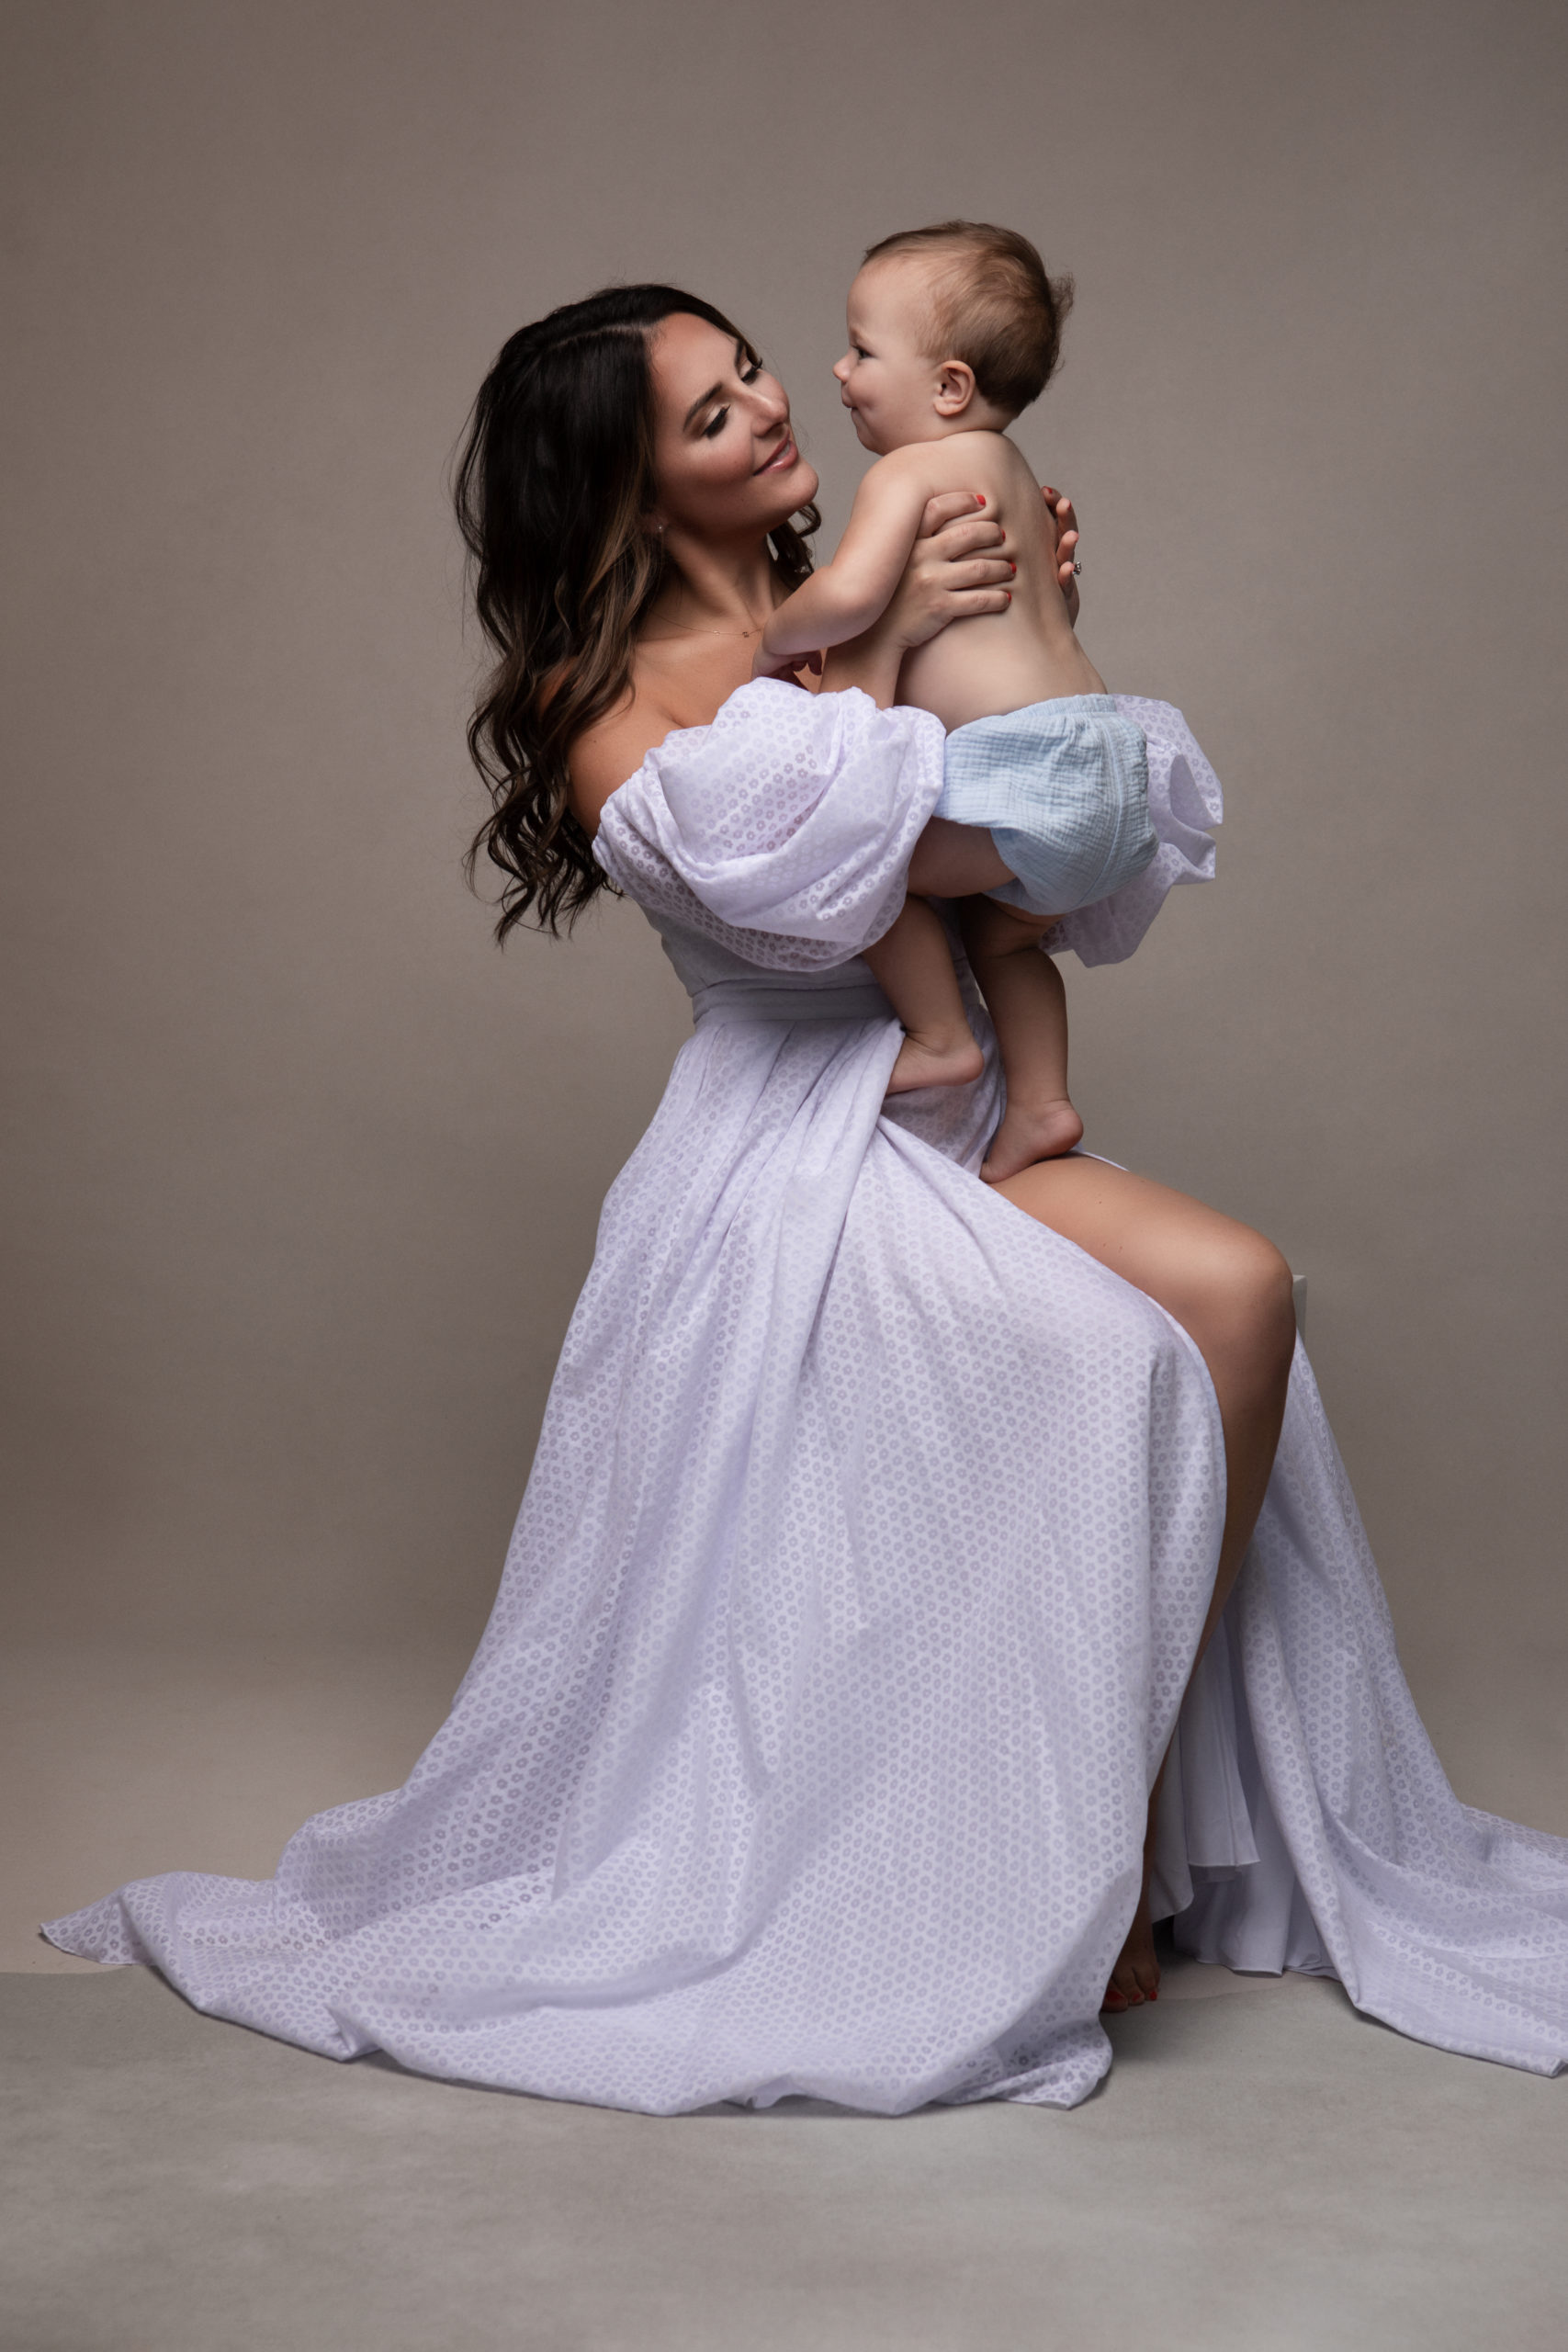 new mom holding her baby in the air while wearing a purple maternity gown